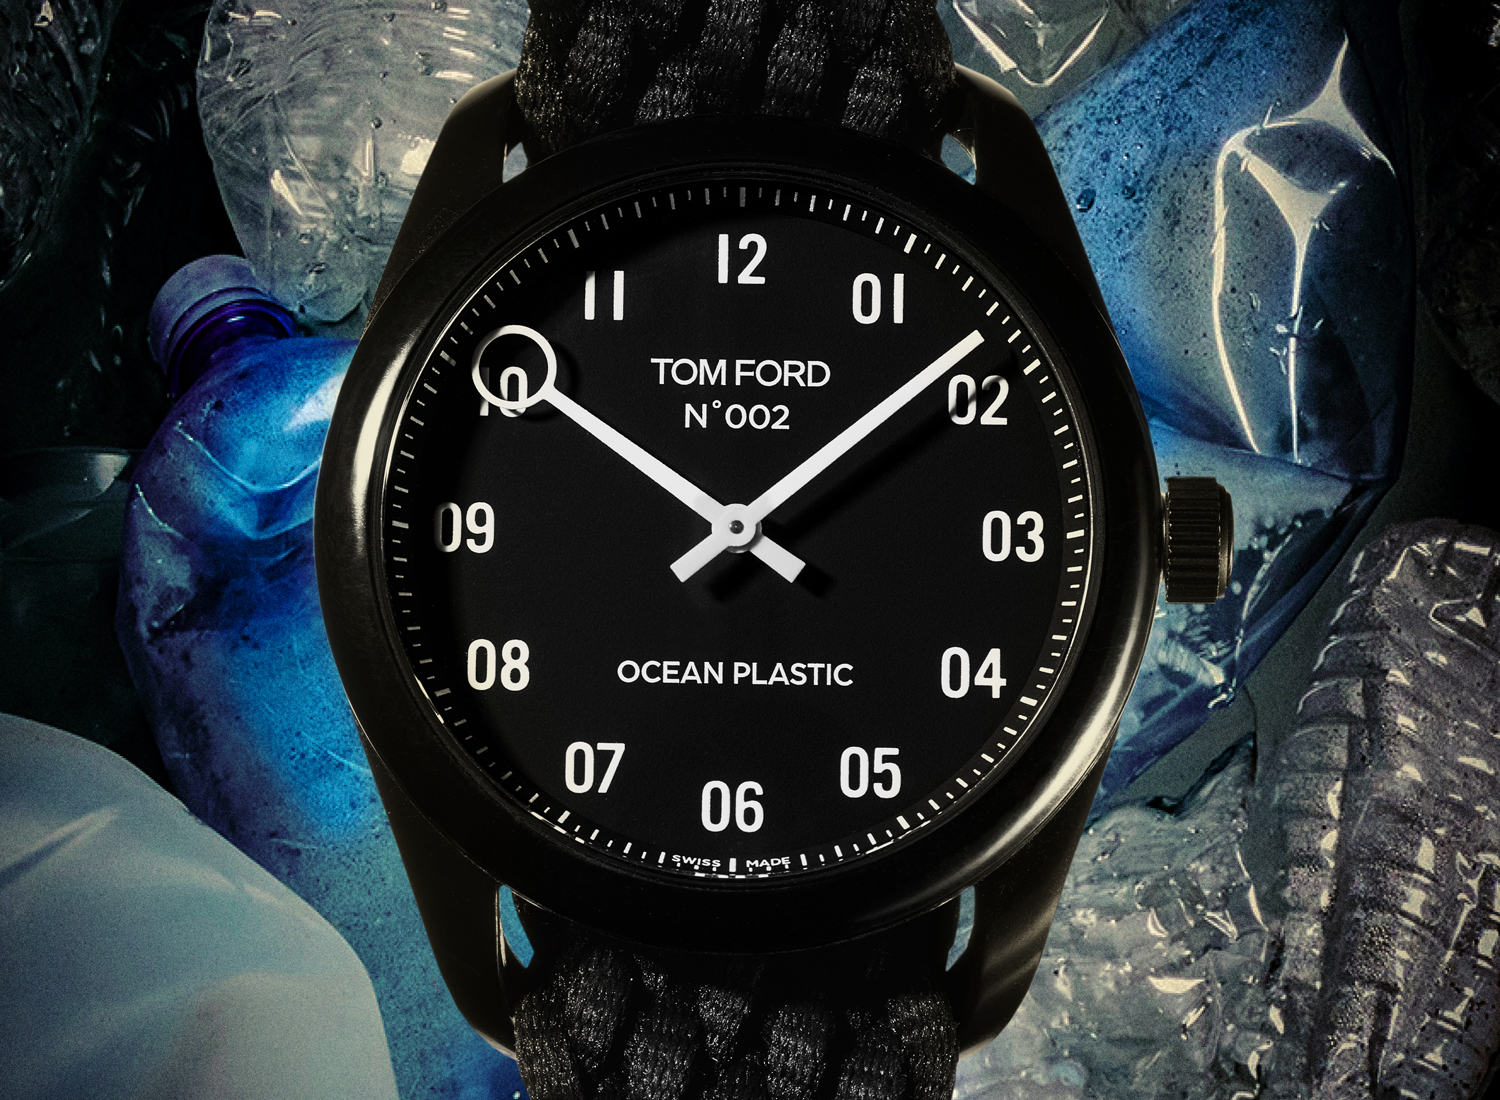 Tom Ford Timepieces makes first watch from plastic recovered from the ocean